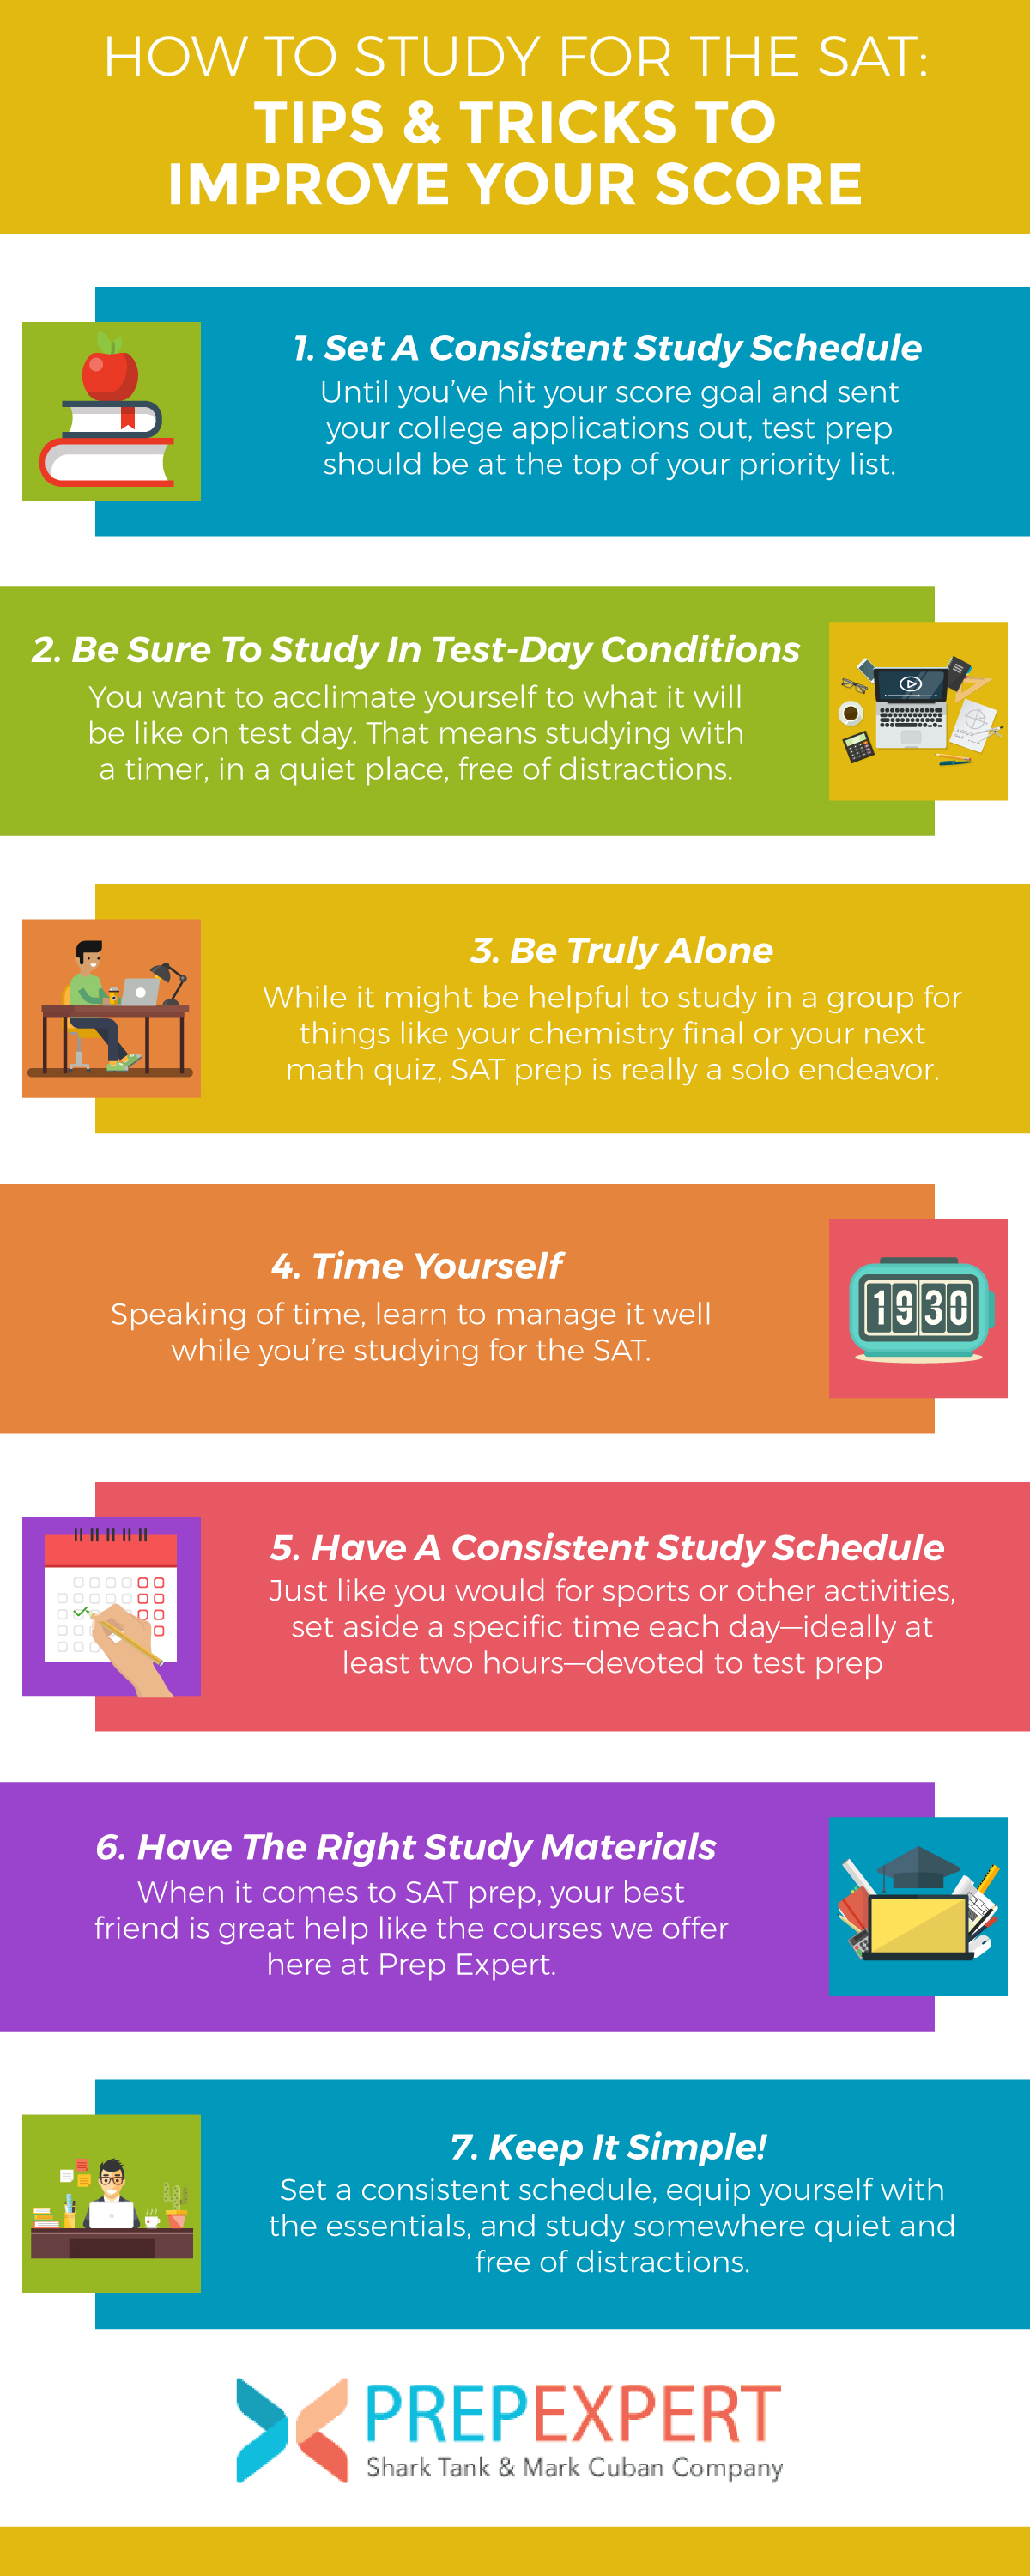 how to study for the SAT prep expert